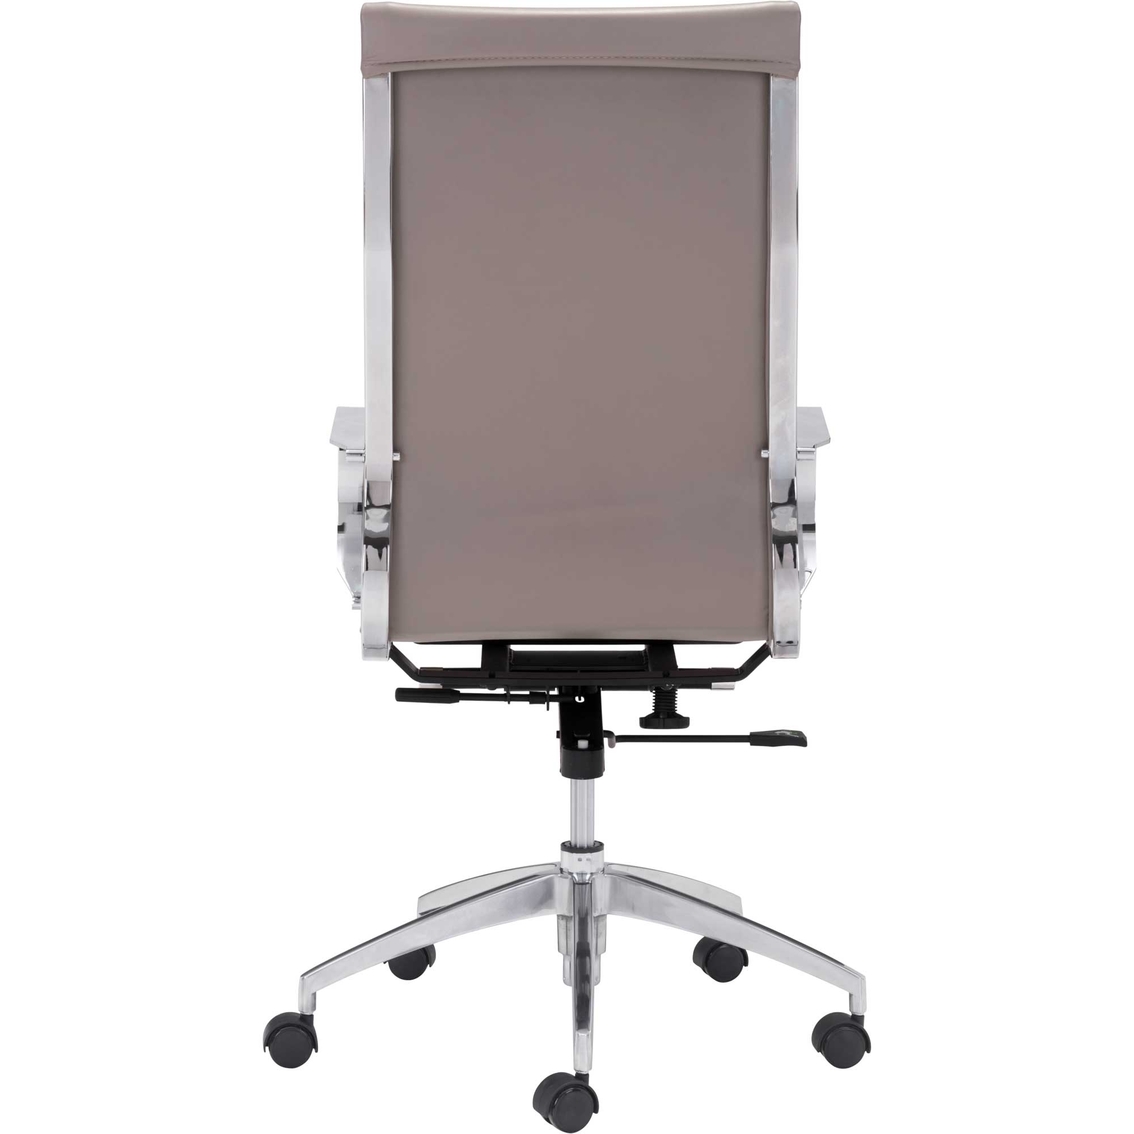 Zuo Modern Glider Hi Back Office Chair - Image 4 of 8